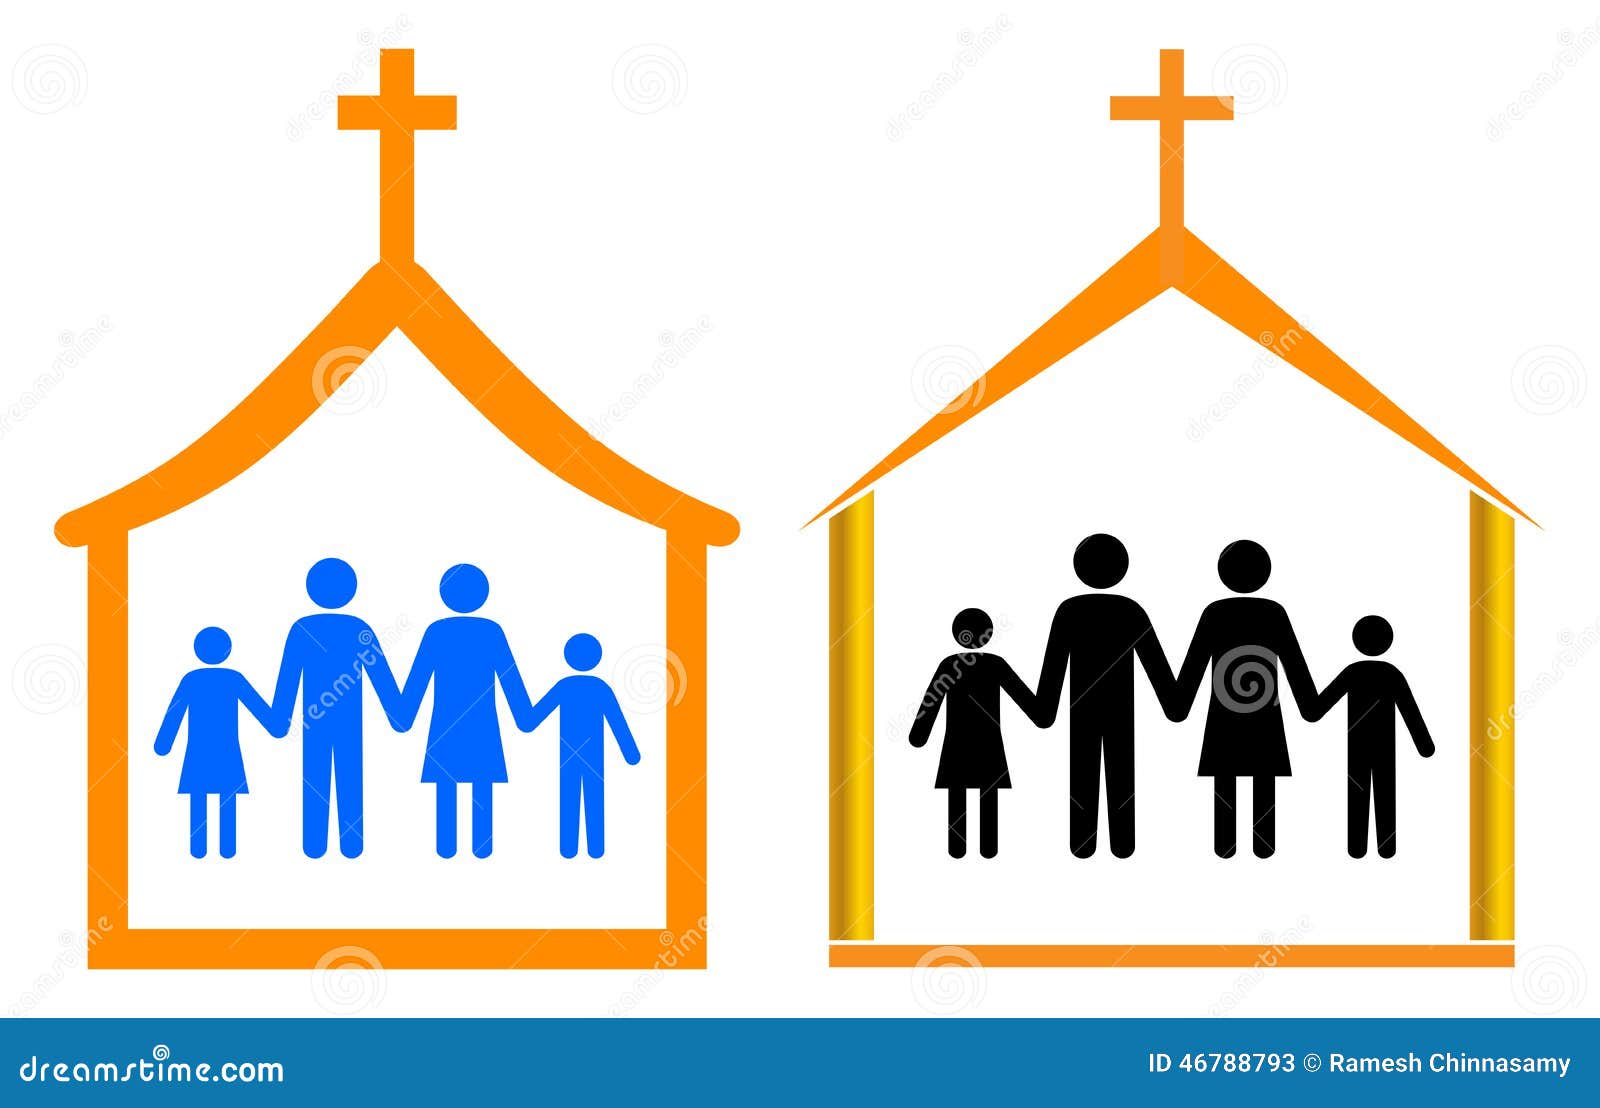 church and family